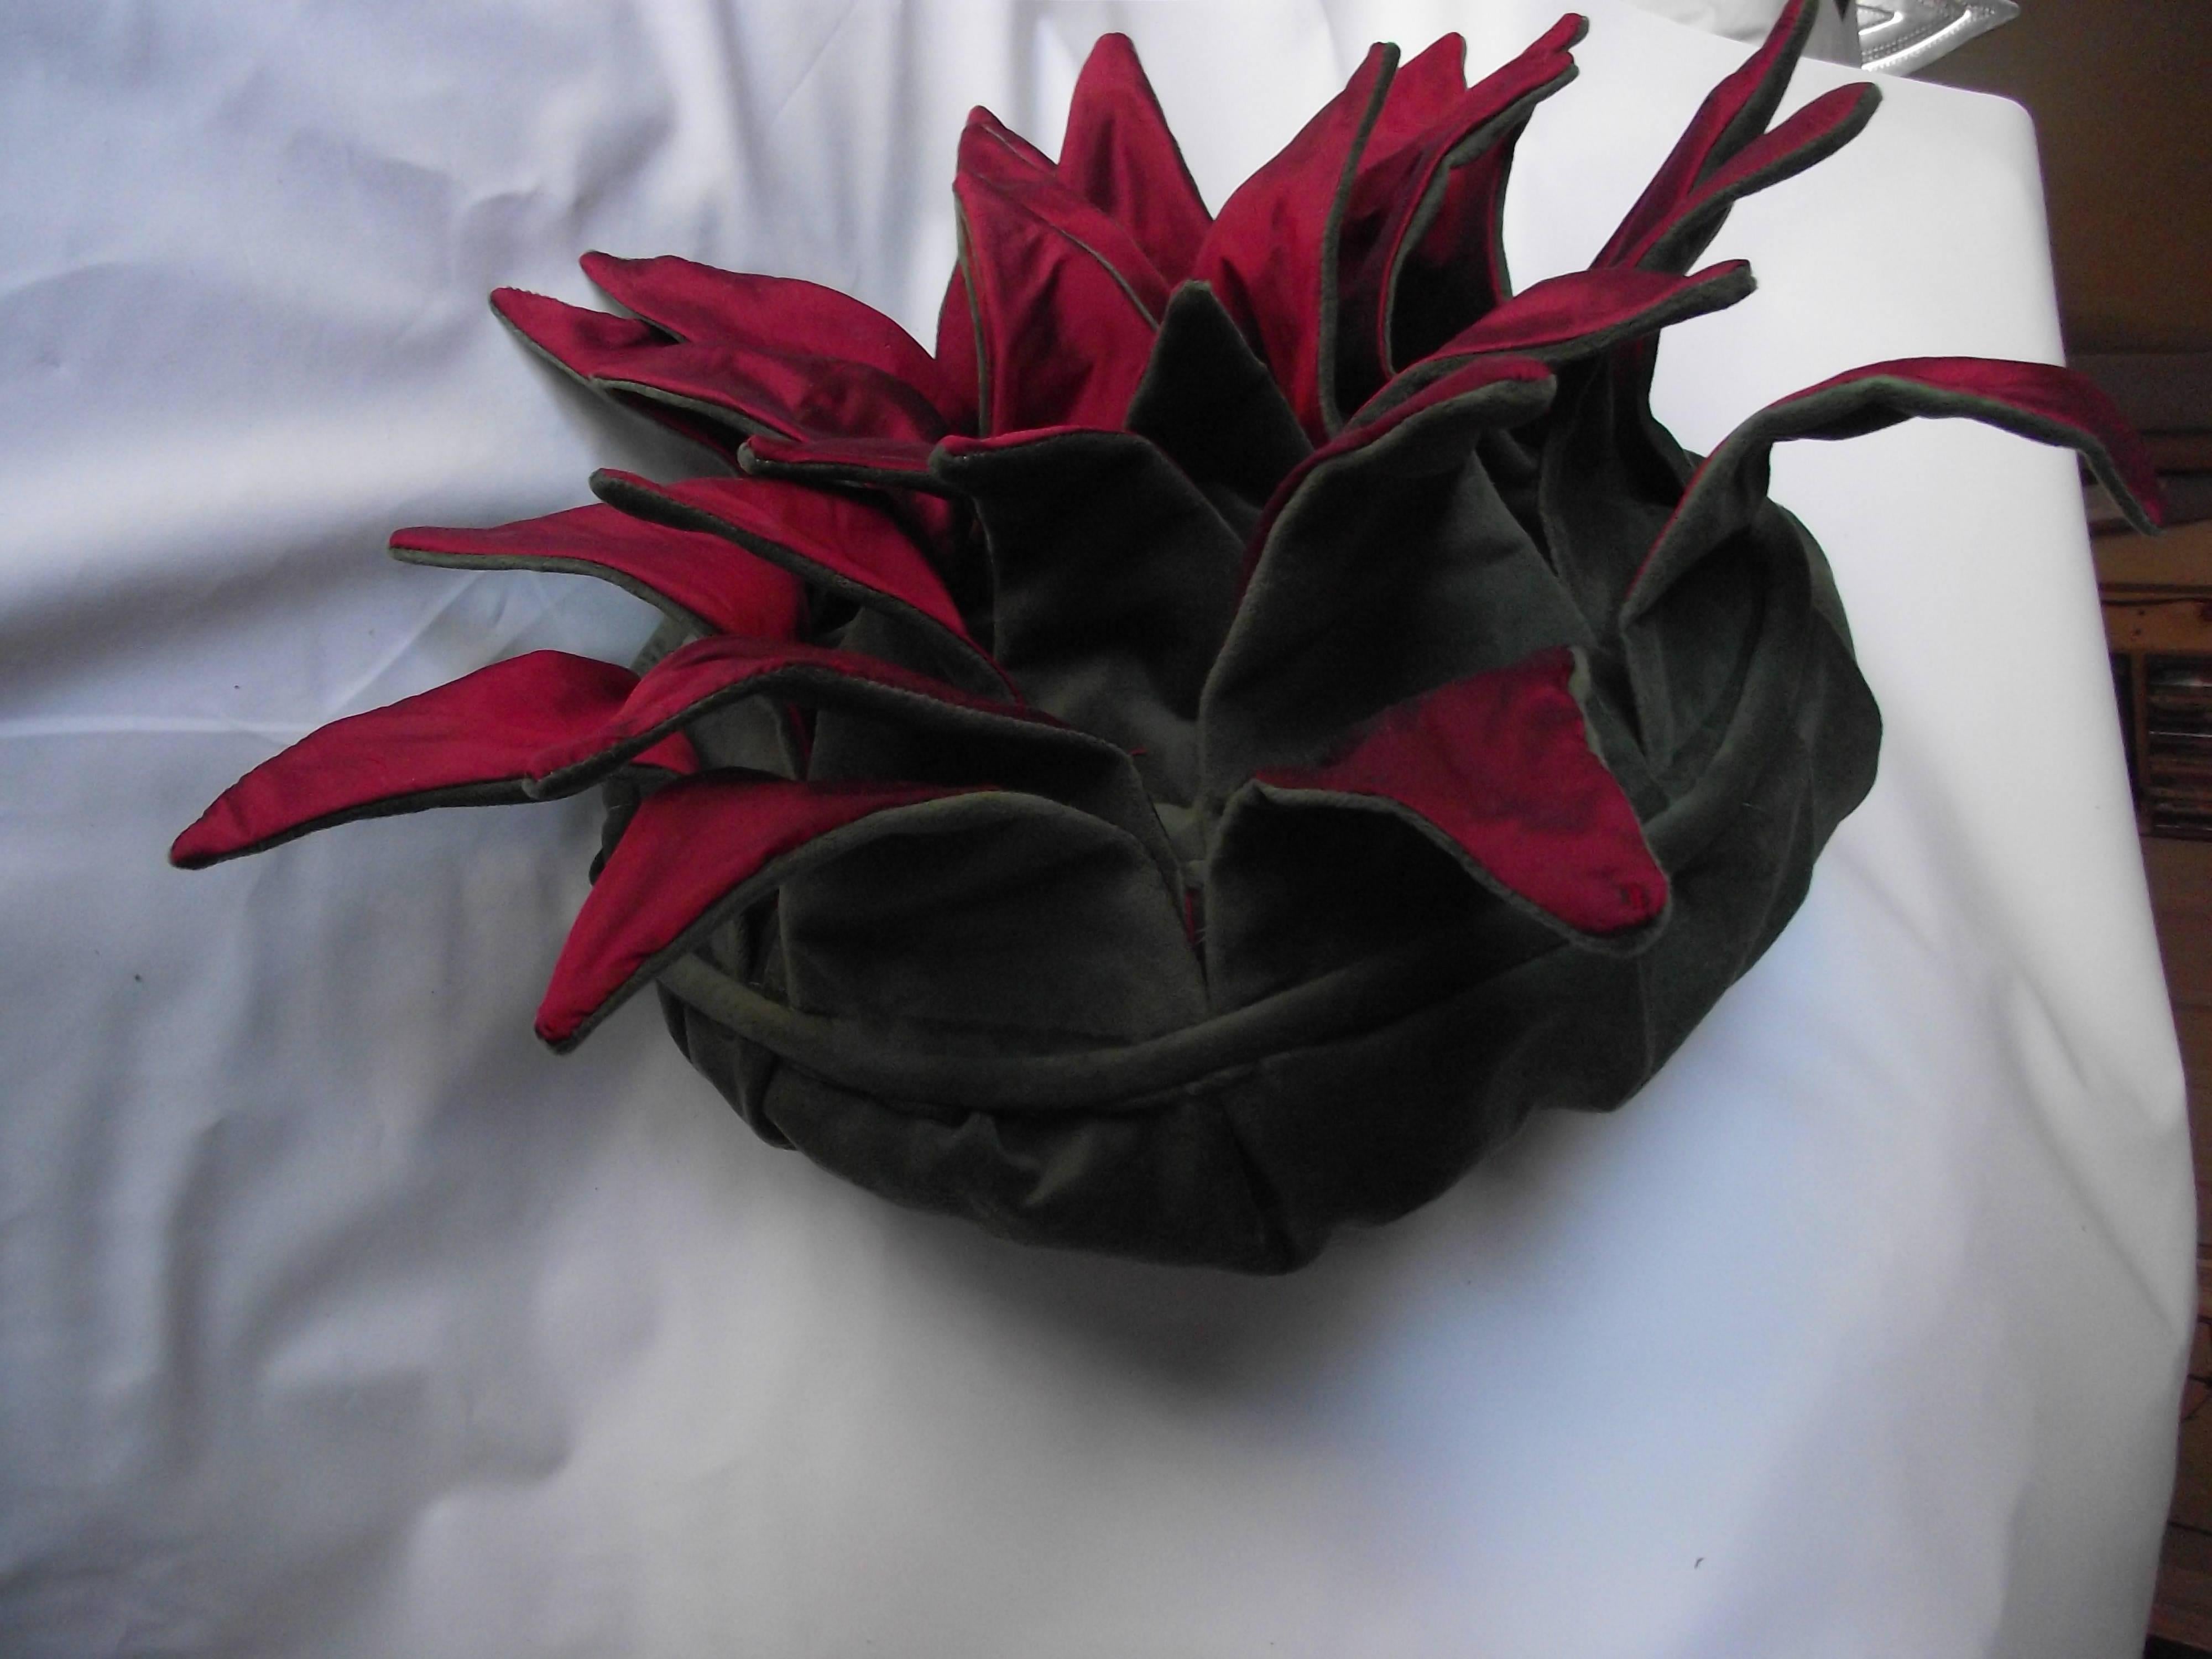 This unusual throw pillow is another original design by W Gantt. It is produced entirely by hand in Gantt Design Studio.
Each red silk flower petal is wired to hold its shape and allow for reshaping. The center of each flower is embellished with